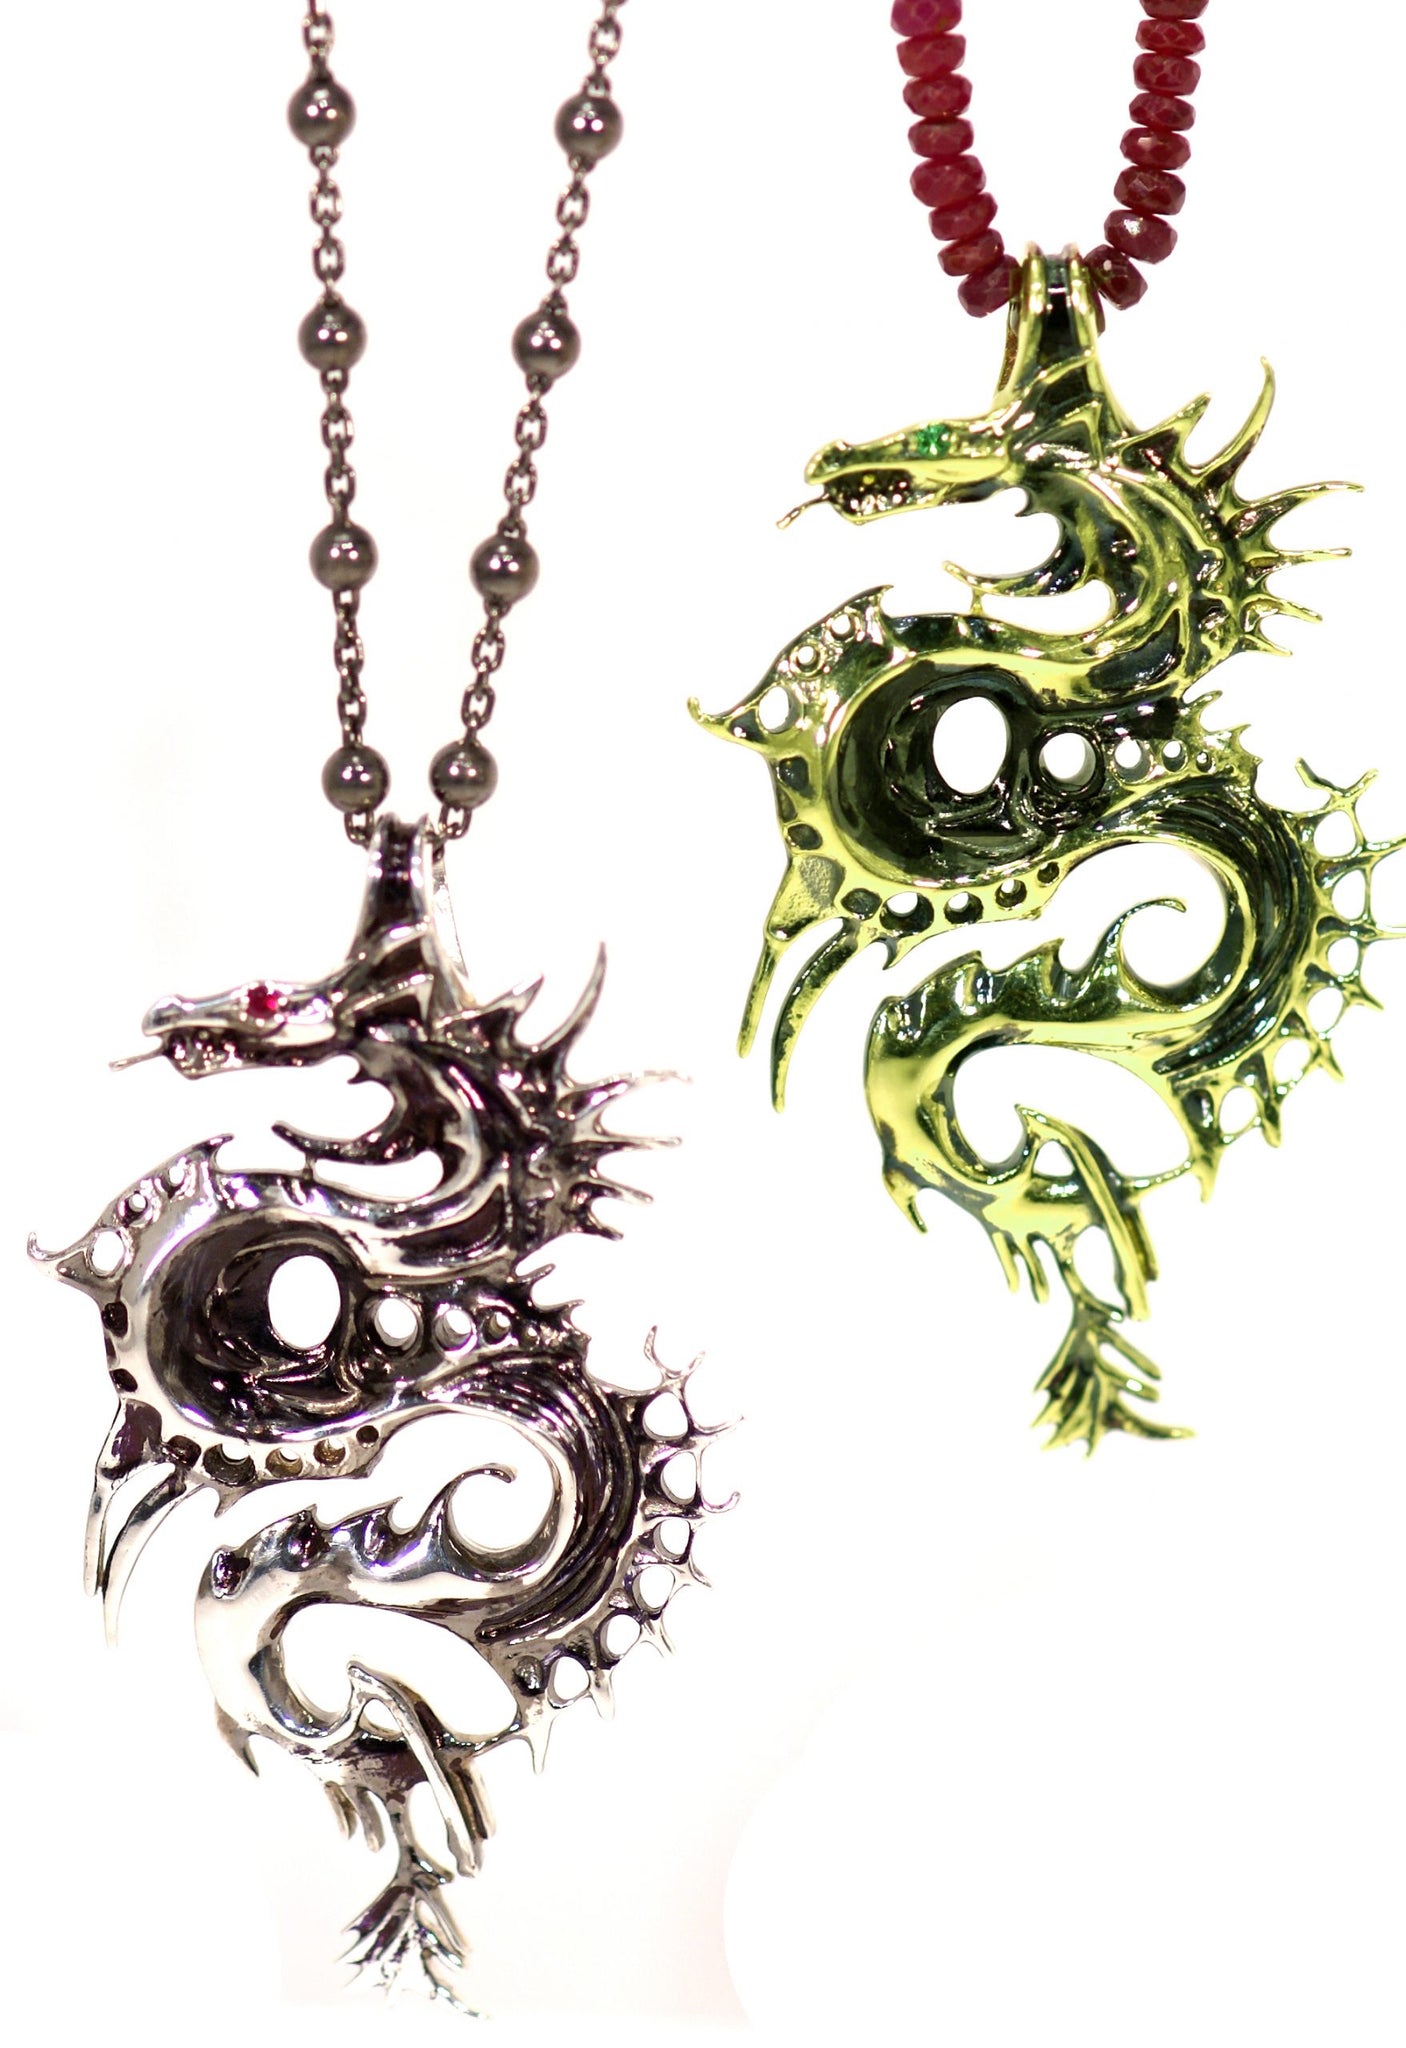 Large Dragon Charm in Anti-Tarnish Sterling Silver